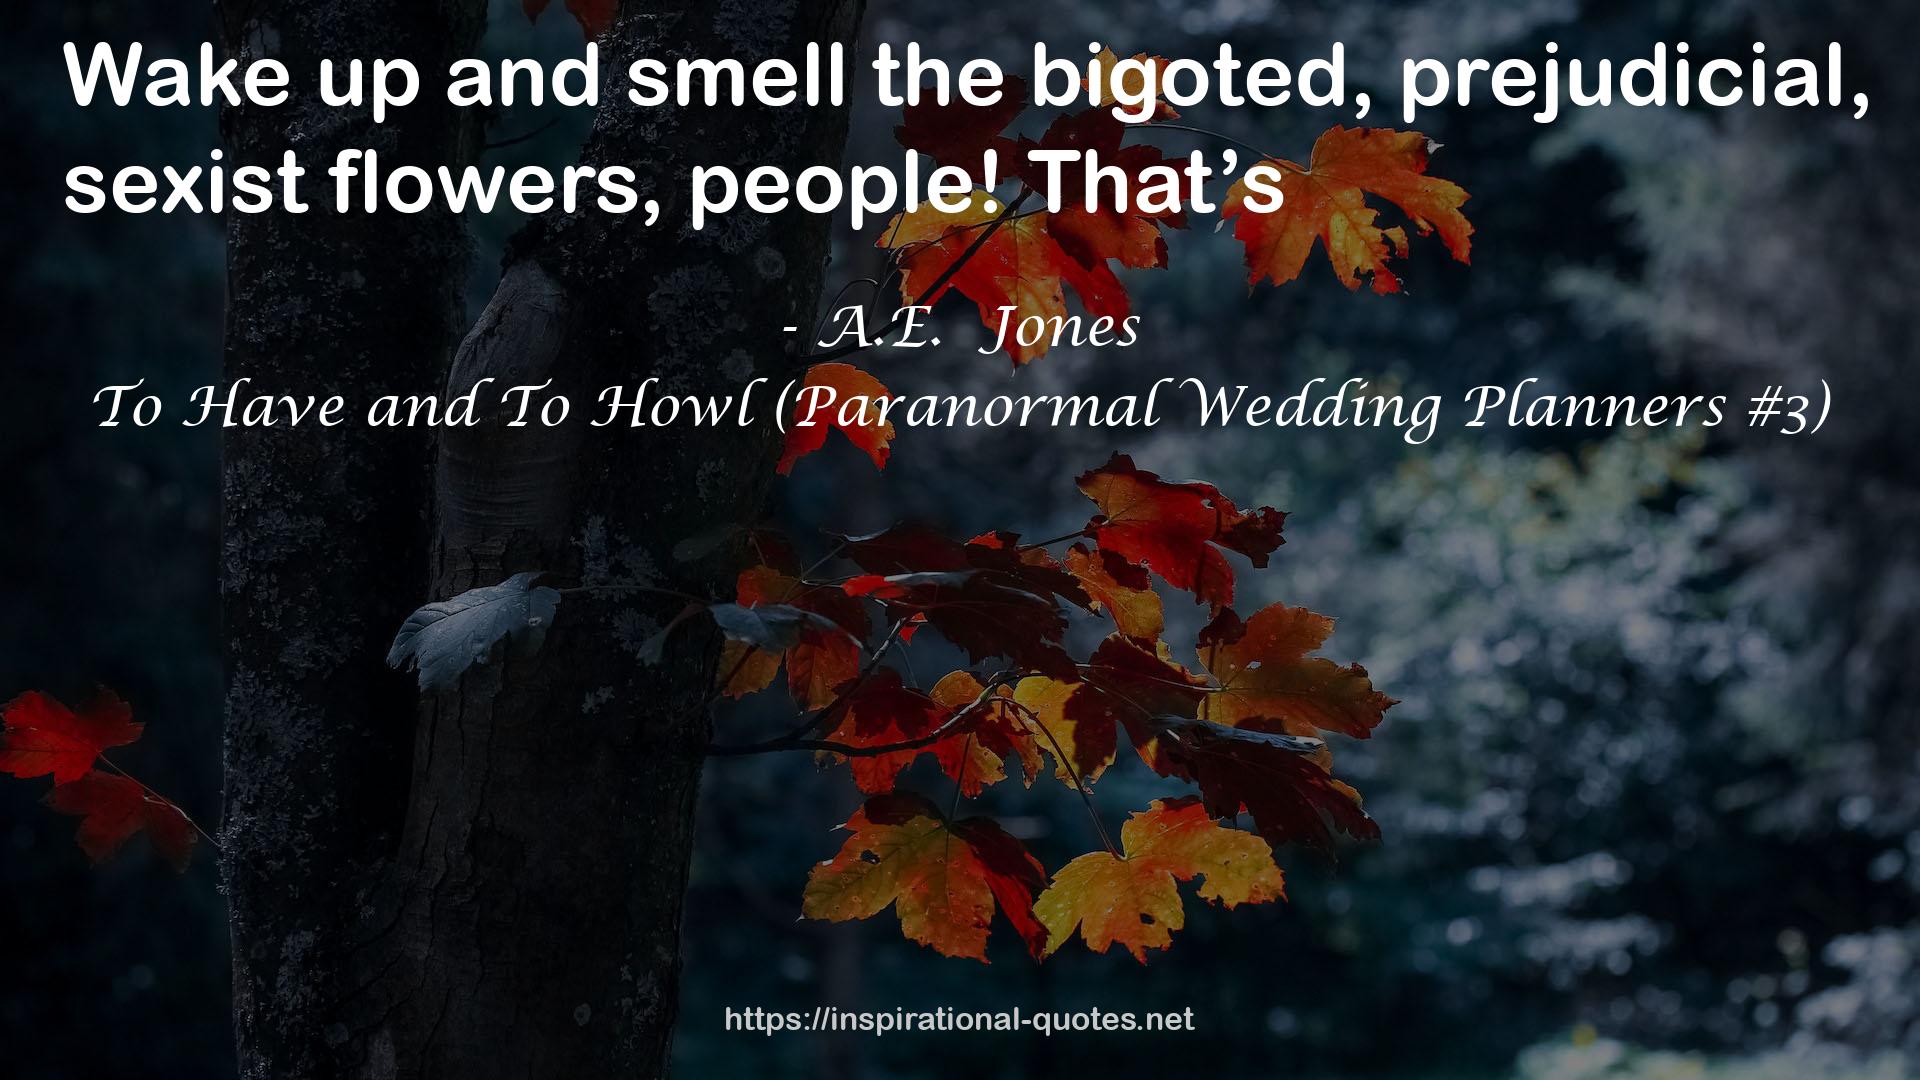 To Have and To Howl (Paranormal Wedding Planners #3) QUOTES